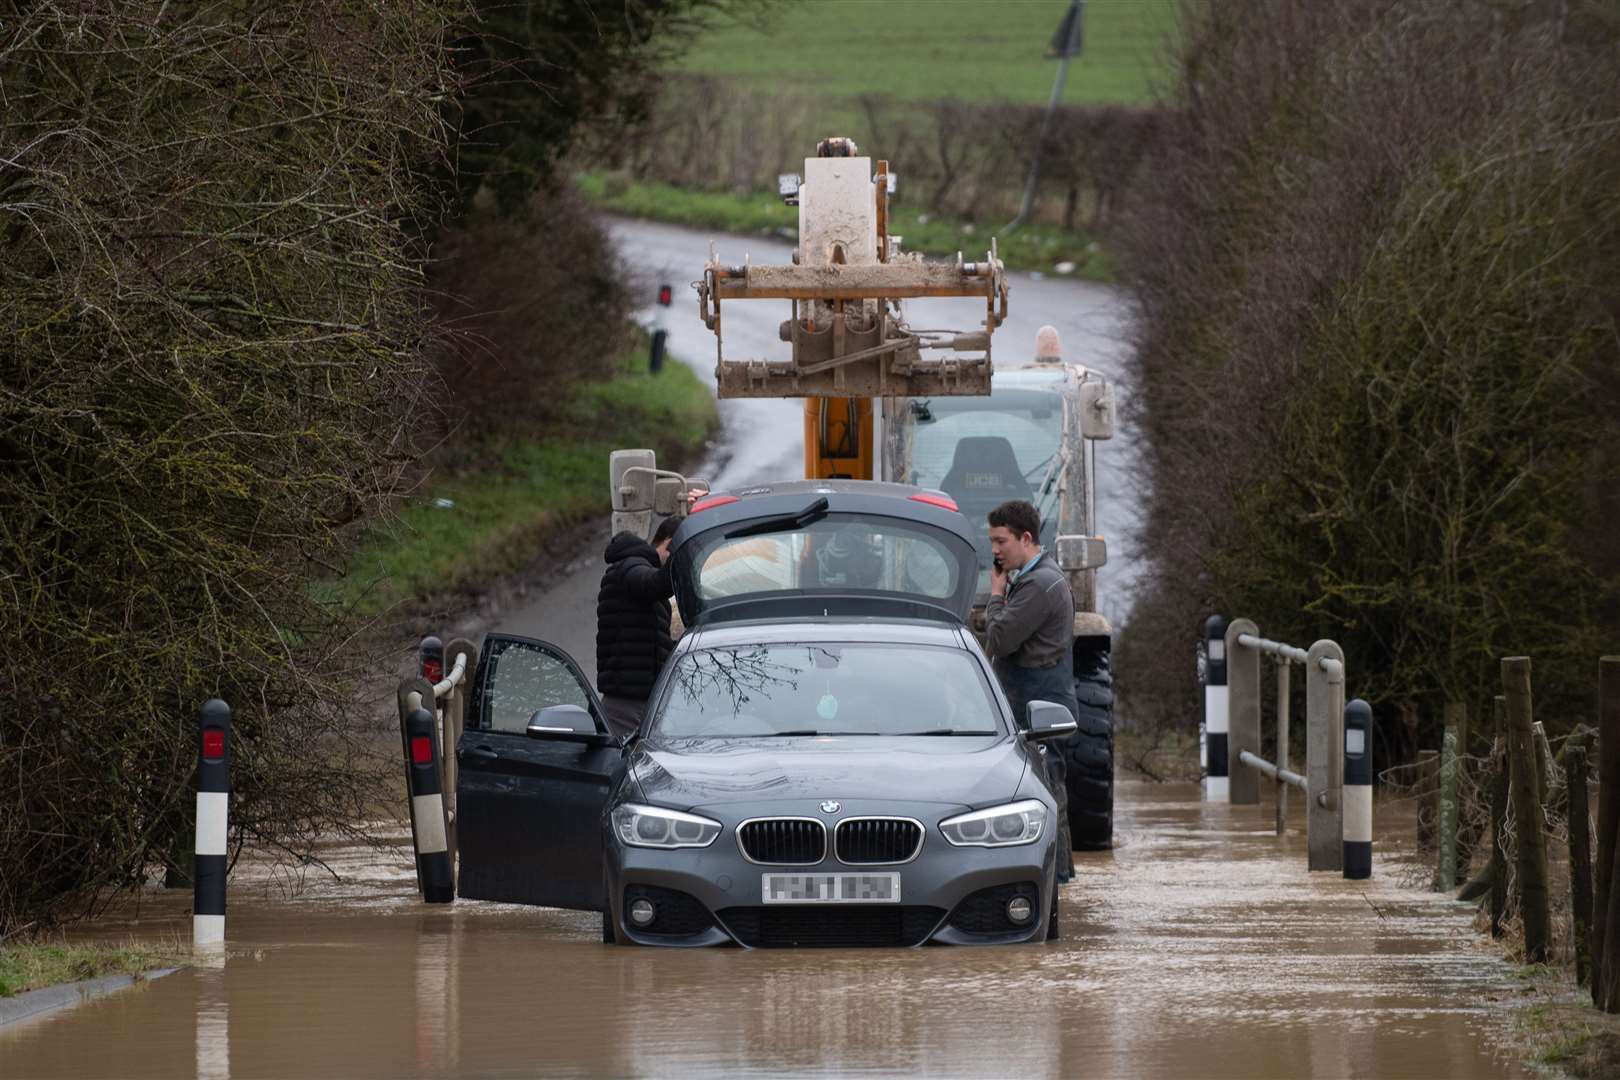 A local farmer helps rescue a stranded motorist from a flood on Hamilton Road in Leicester (Joe Giddens/PA)